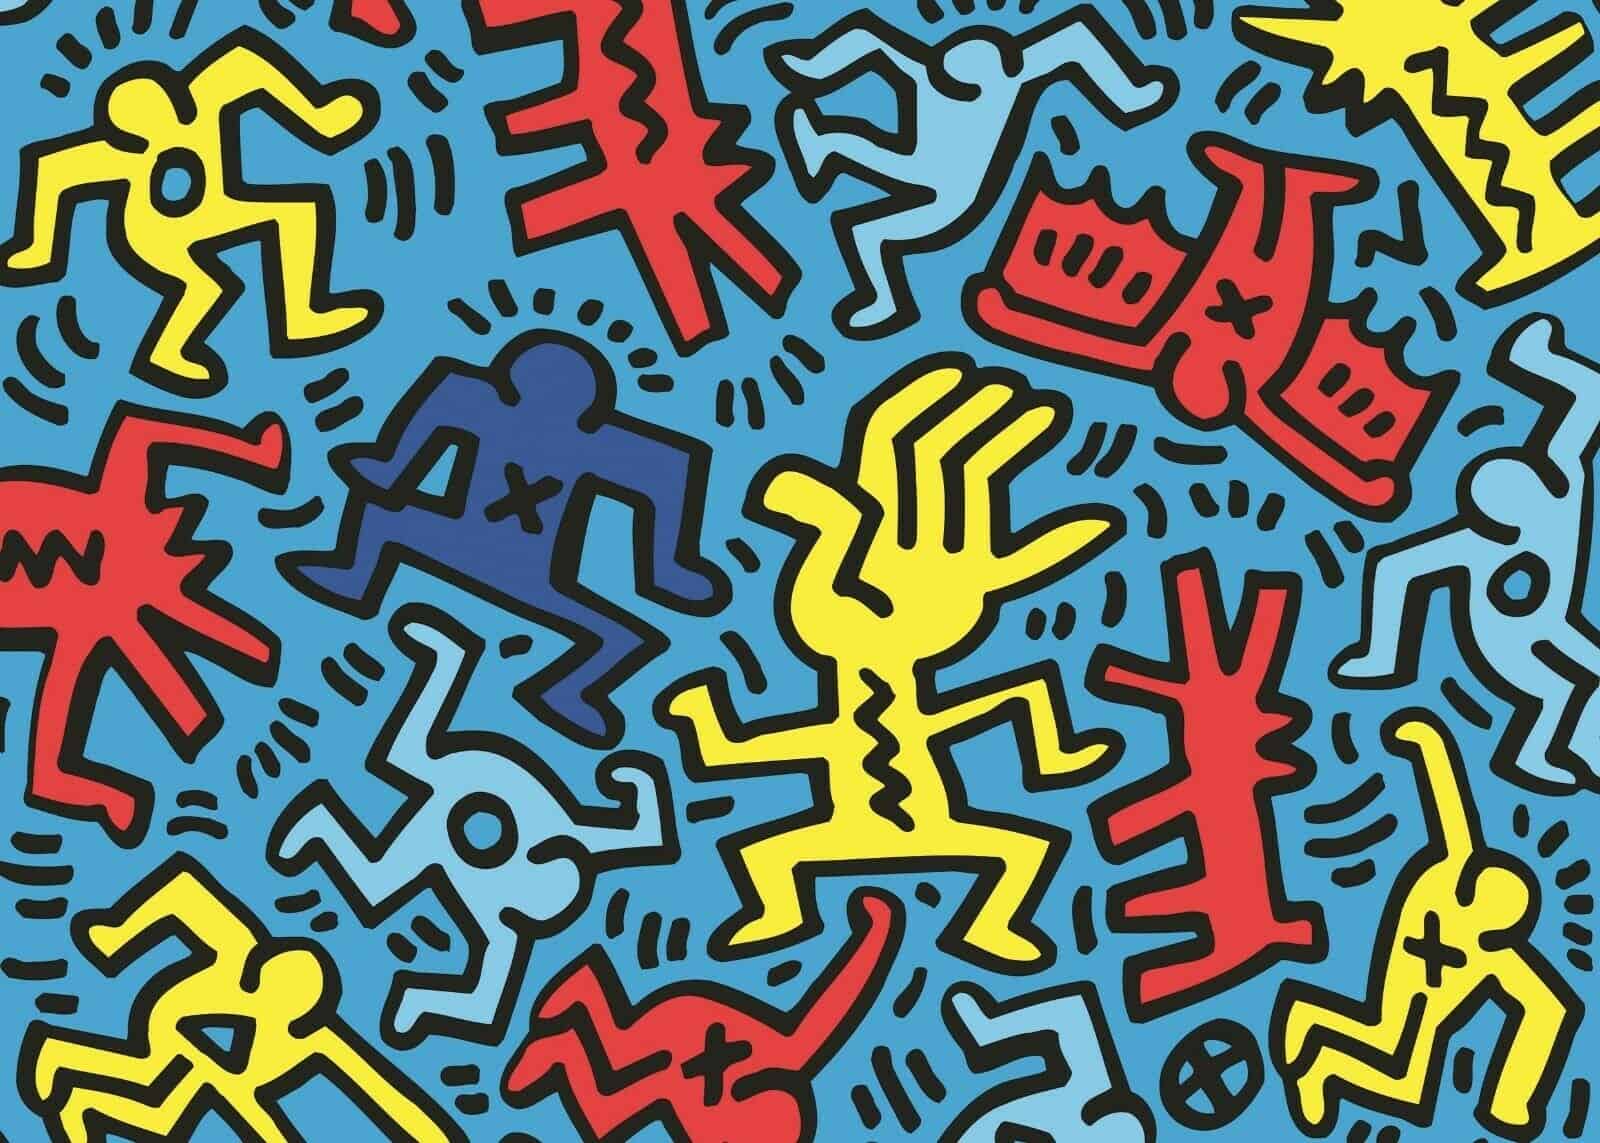 Puzzle  Keith Haring 092 Color 2 1000 pz Ravensburger 149926